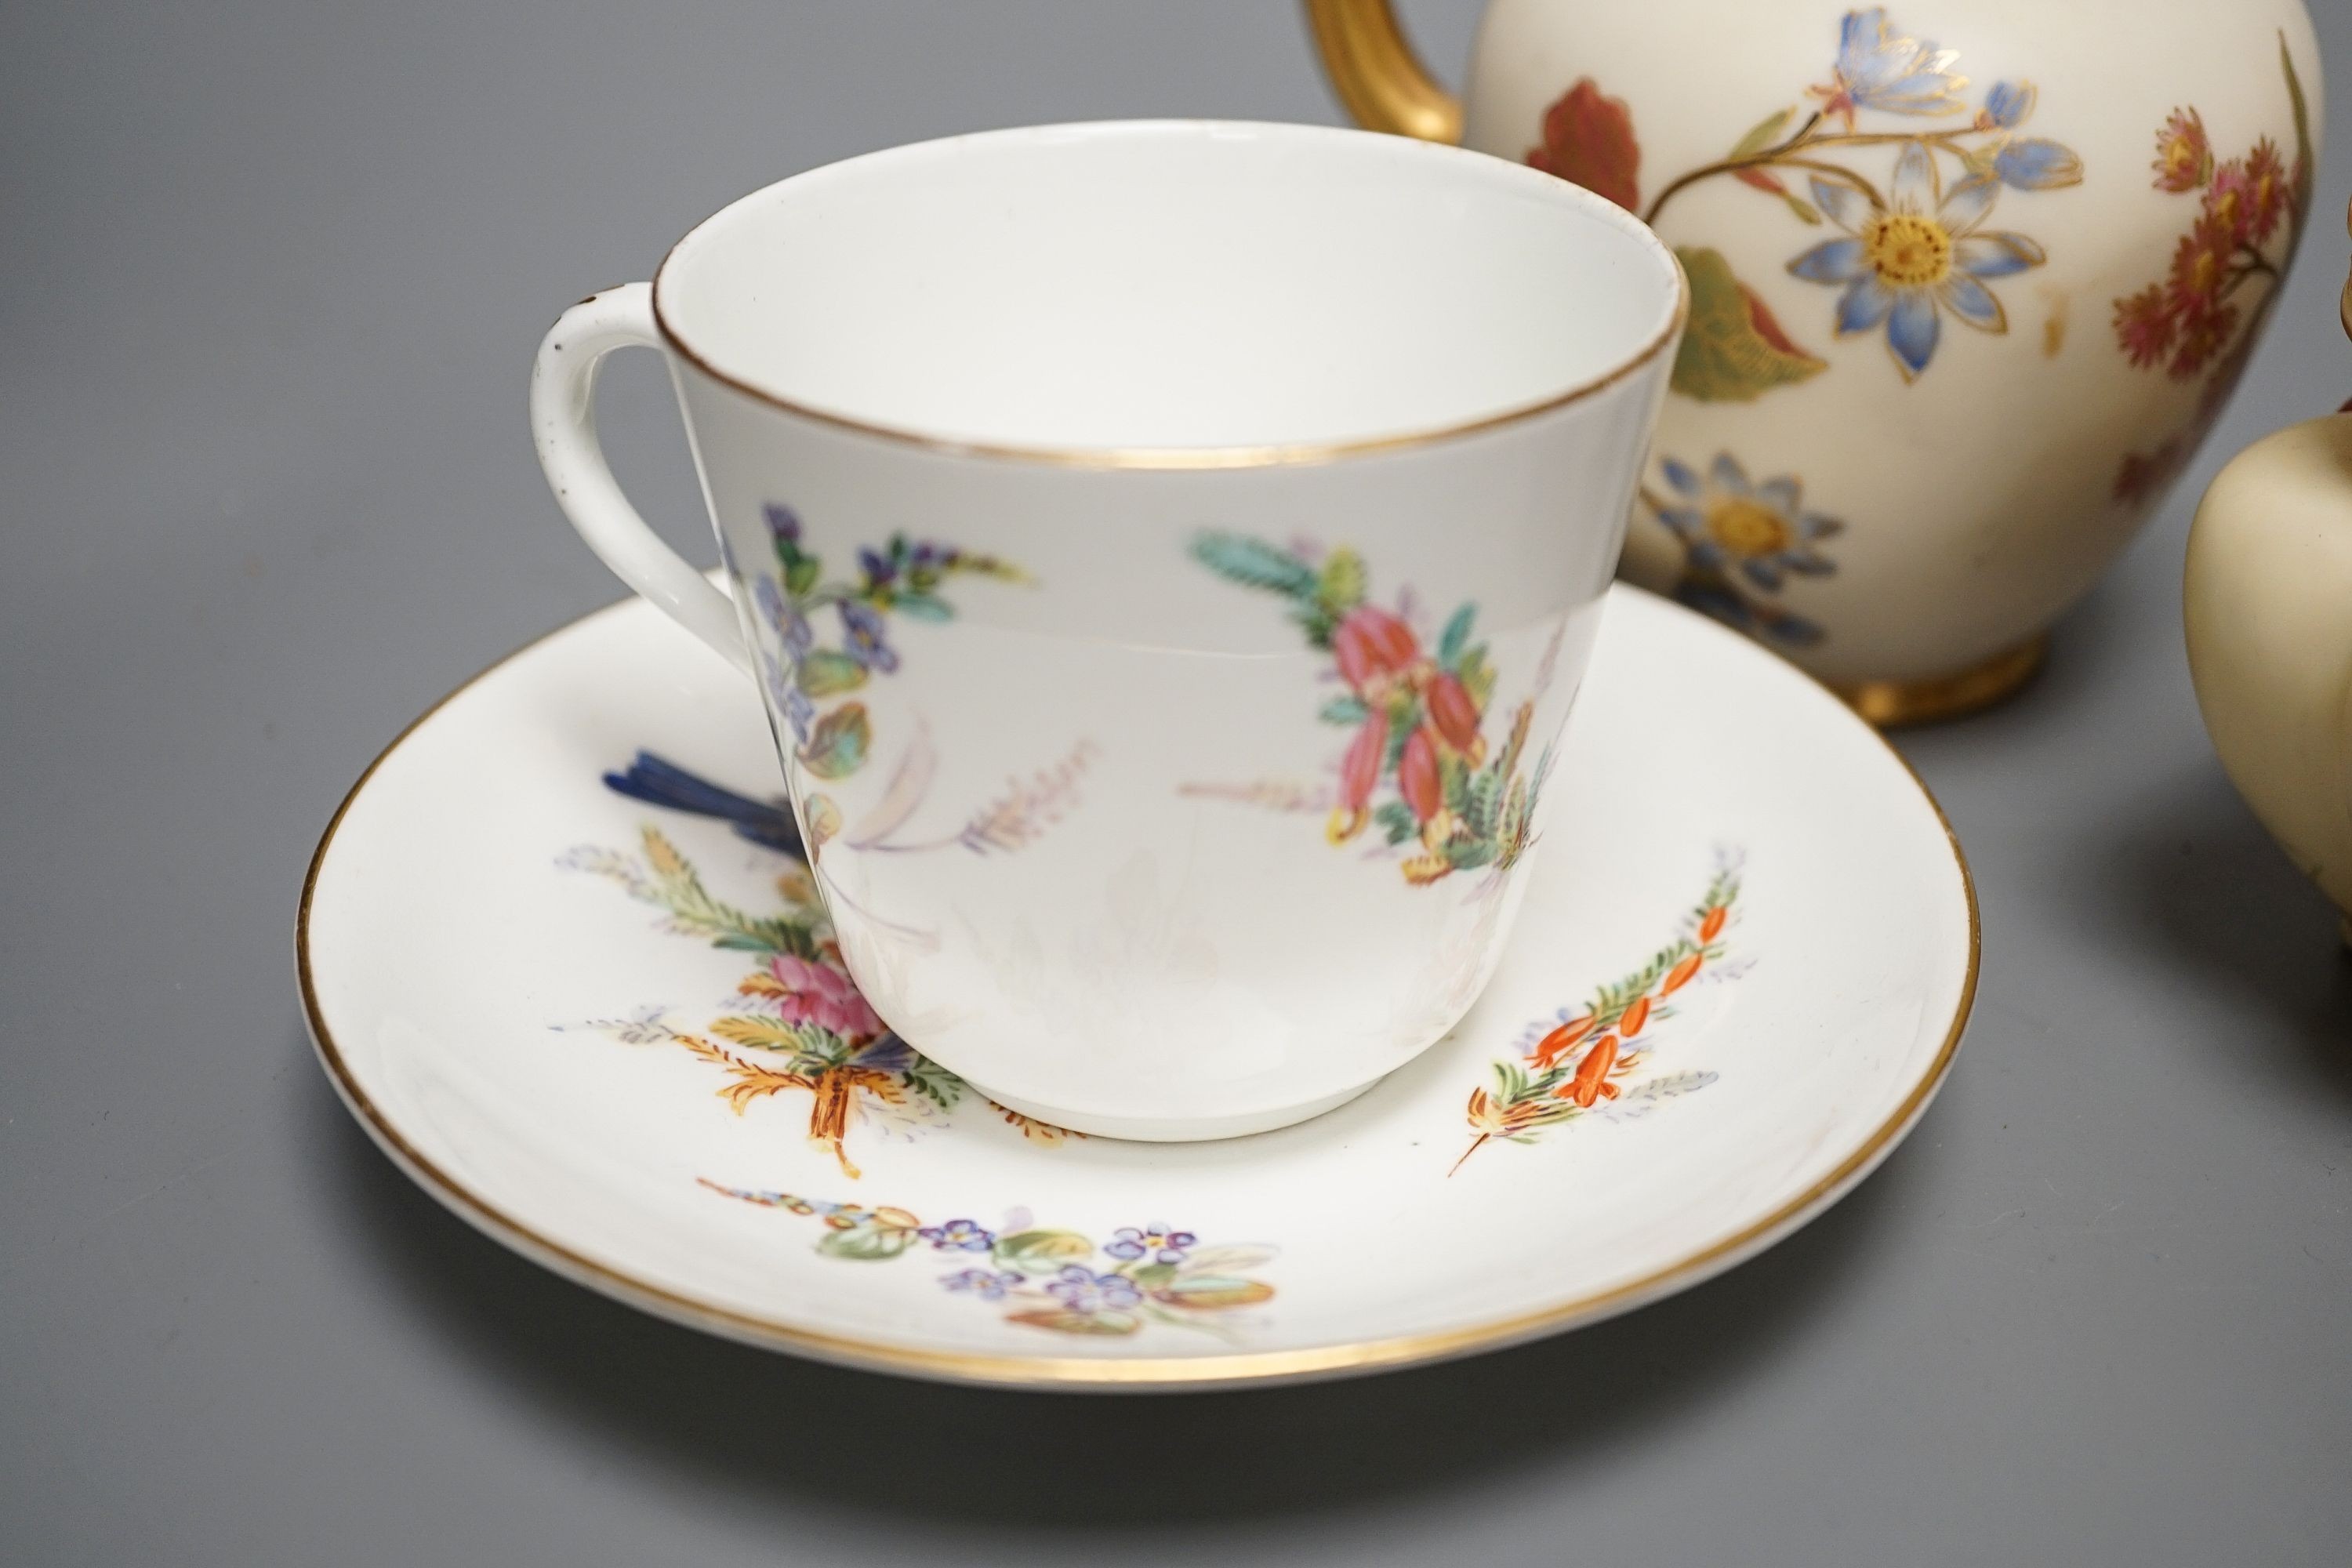 A Worcester bird painted cup and saucer, a blush ivory jug and pot and an ivory jug